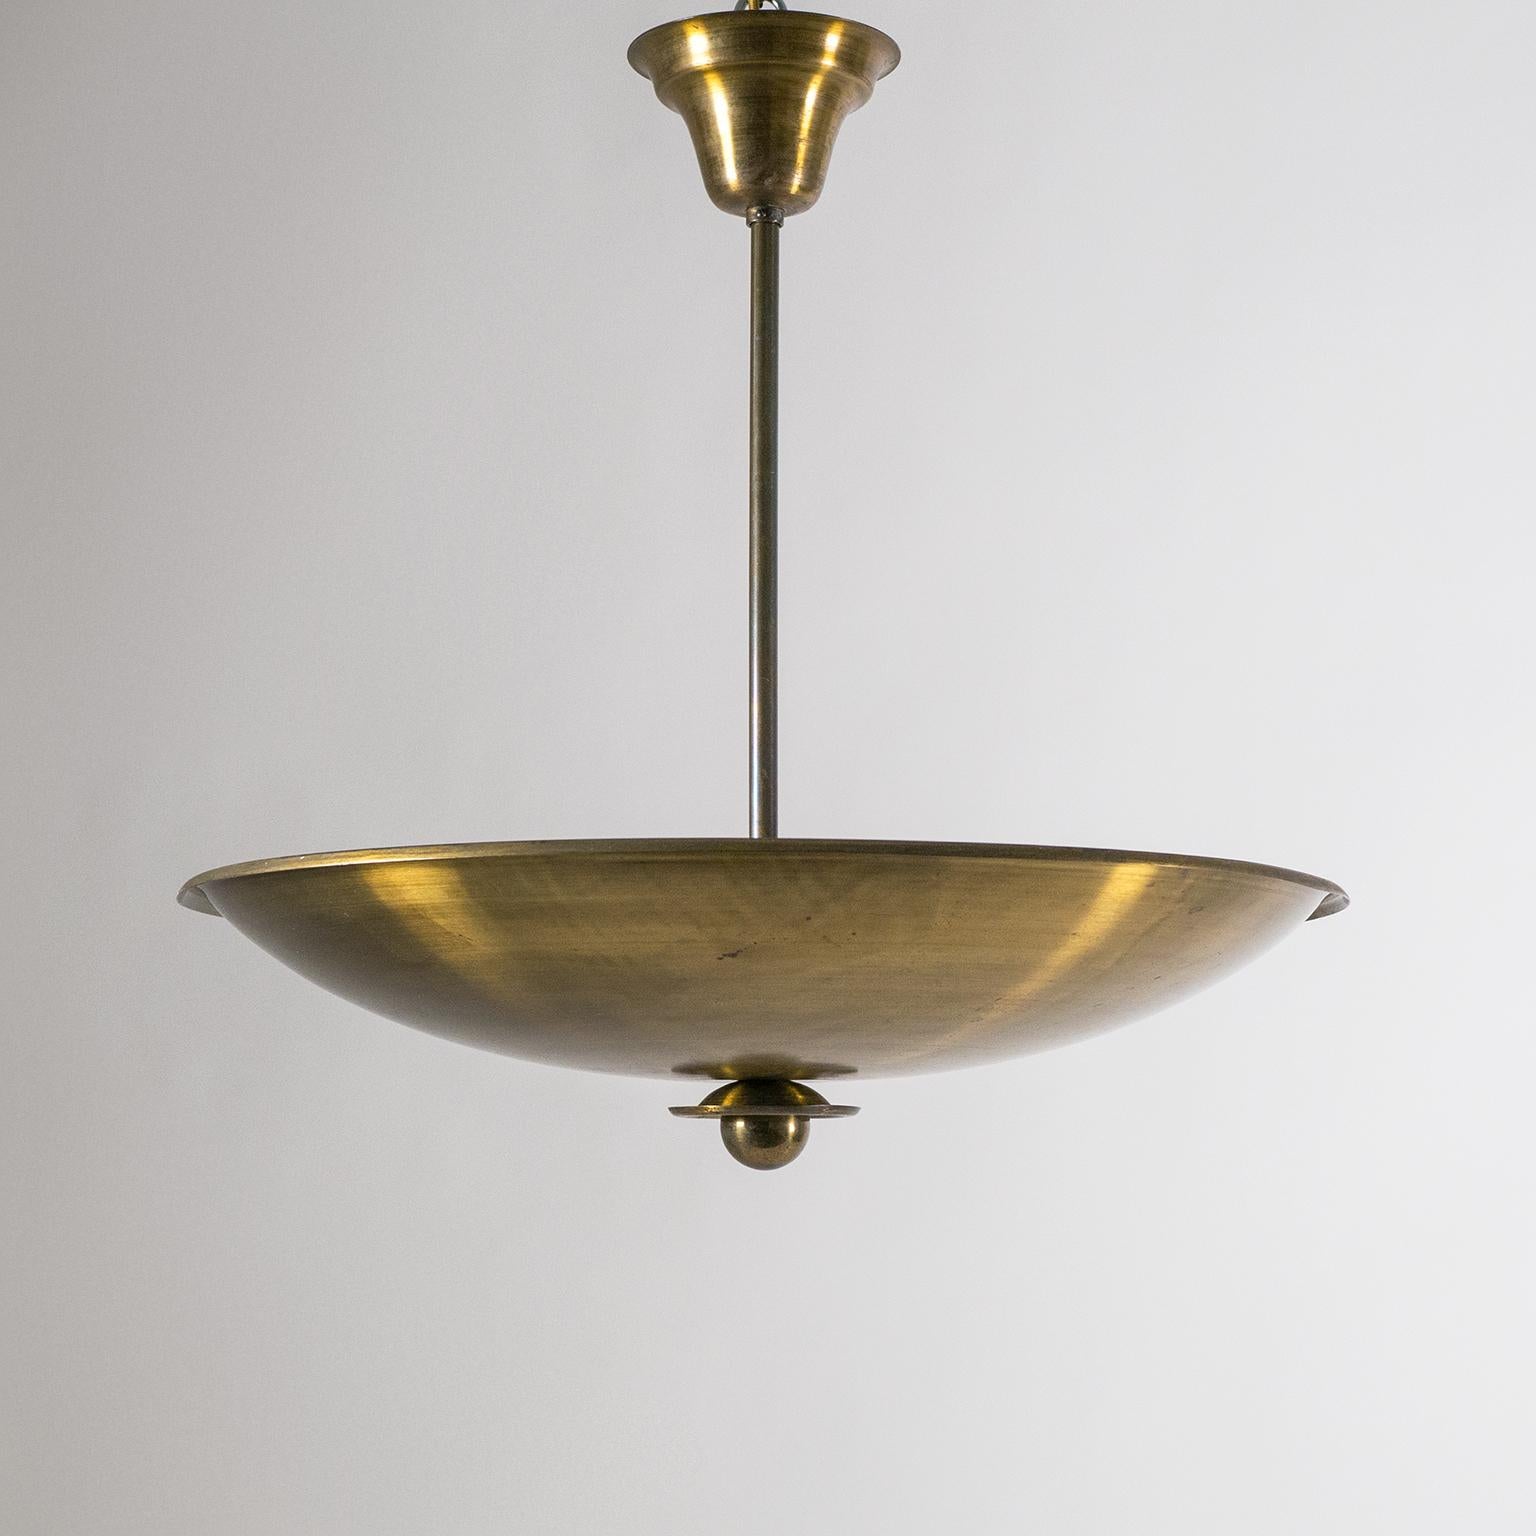 Excellent uplight chandelier from the 1940s made of very solid brass. A rare combination of Art Deco craftmanship and details with midcentury minimalism. Nice original condition with beautiful patina on the brass and some wear to the original